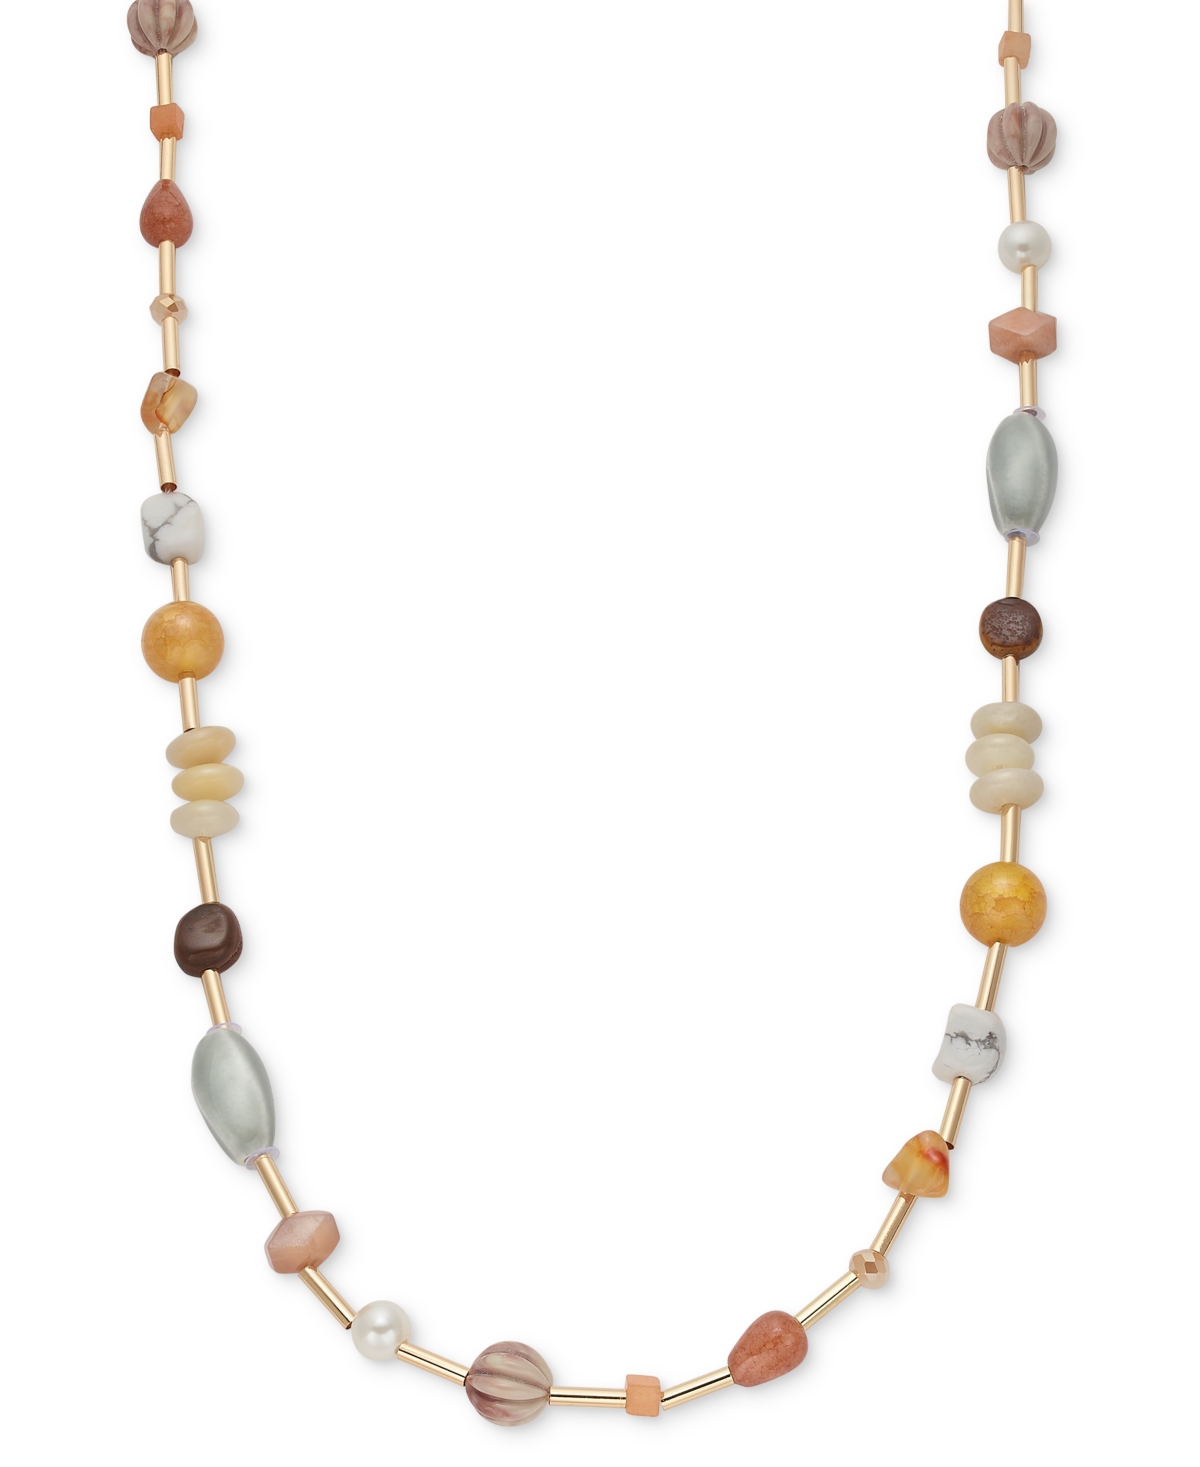 Gold-Tone Multi Bead Station Long Necklace, 42" + 3" extender, Created for Macy's - Brown